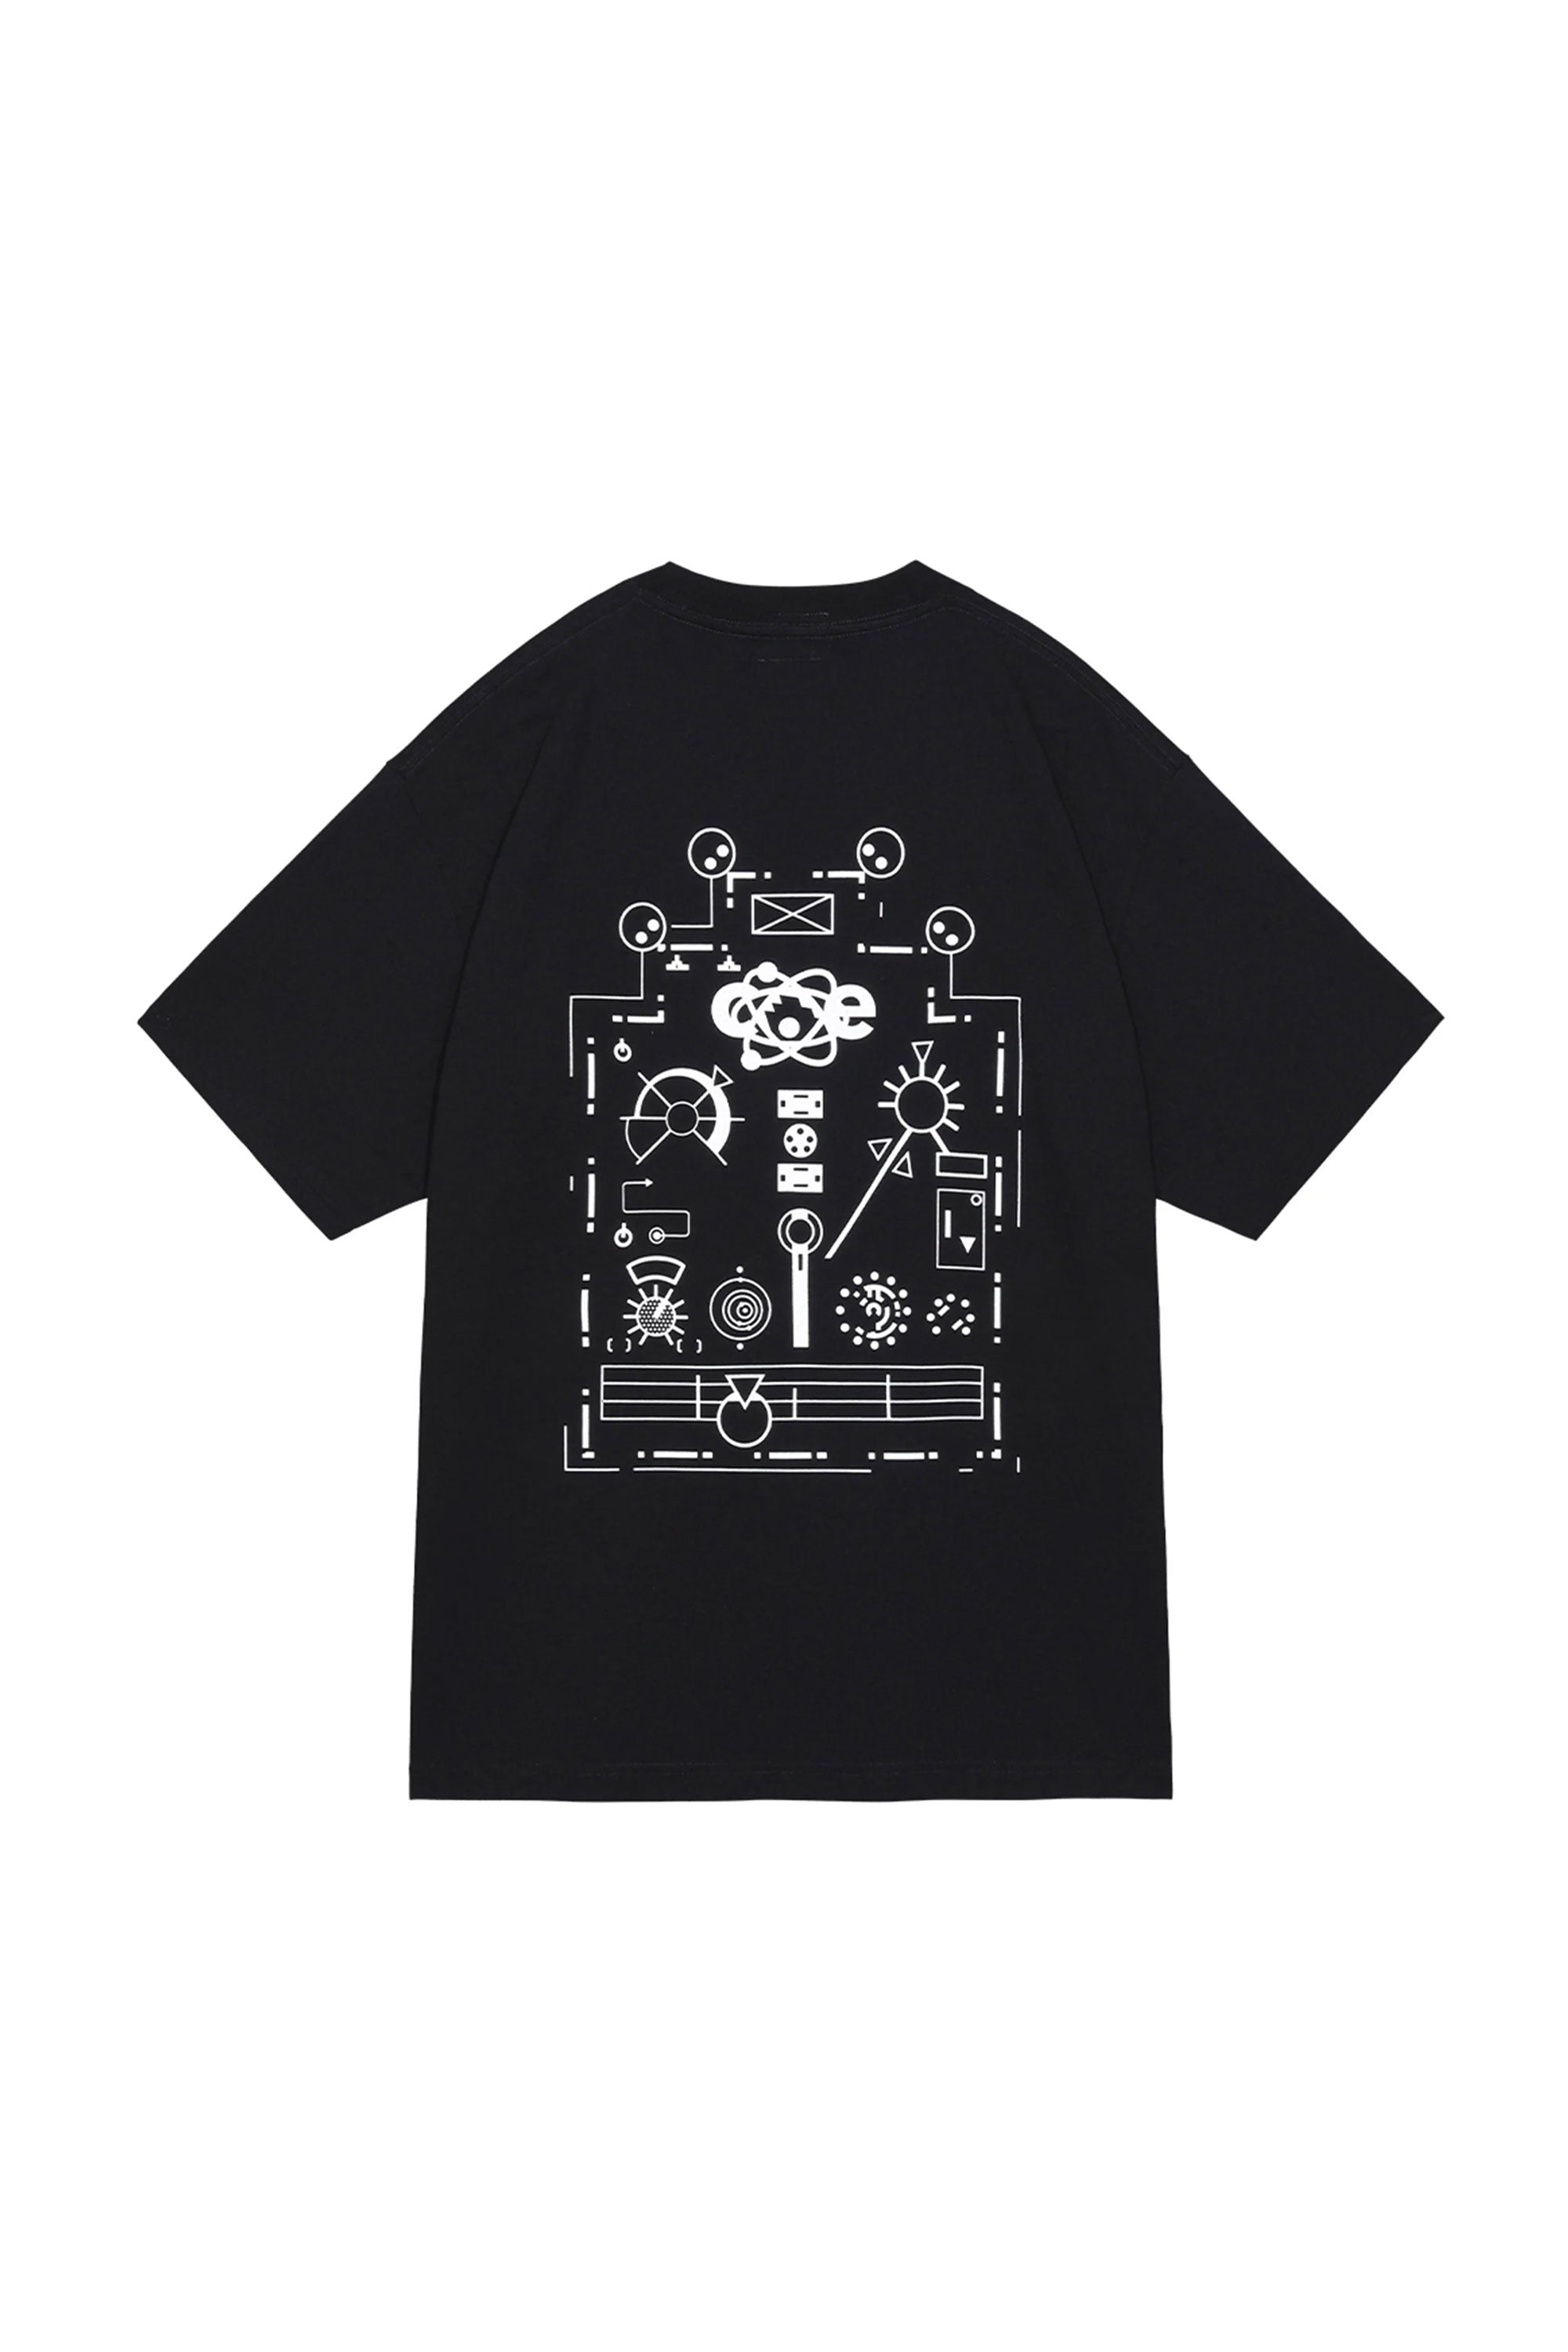 The CAV EMPT - ZIGGURAT CONTROL T  available online with global shipping, and in PAM Stores Melbourne and Sydney.